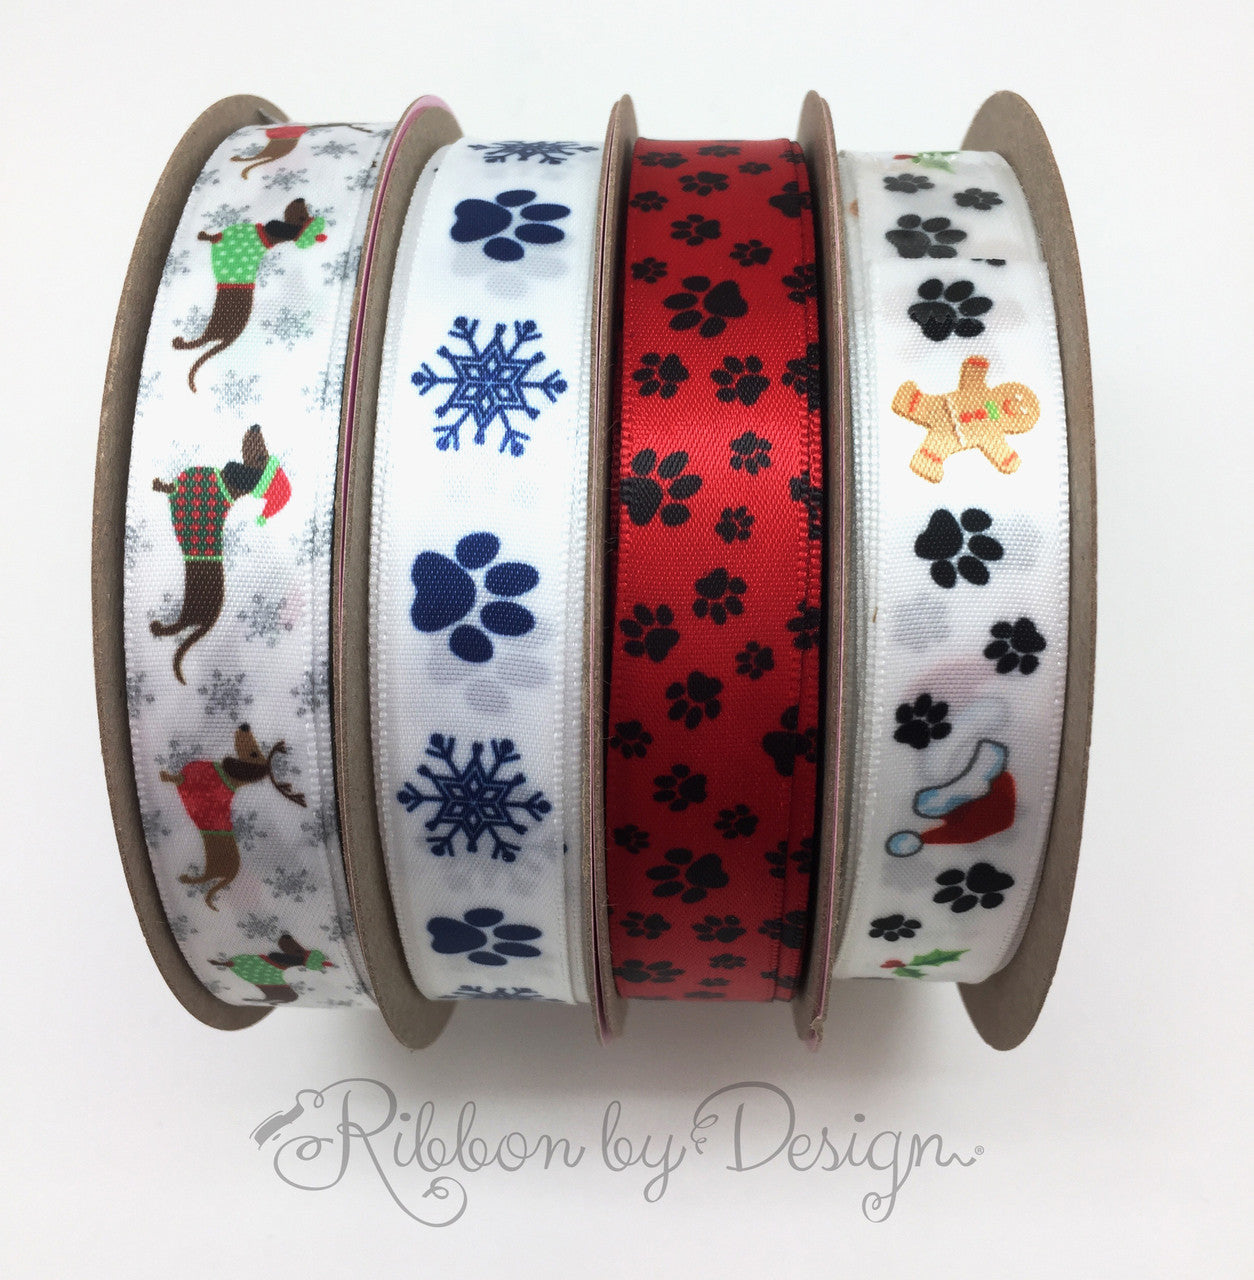 Dachshund ribbon, Dachshunds dressed in Holiday sweaters printed on 5/8" white single face satin